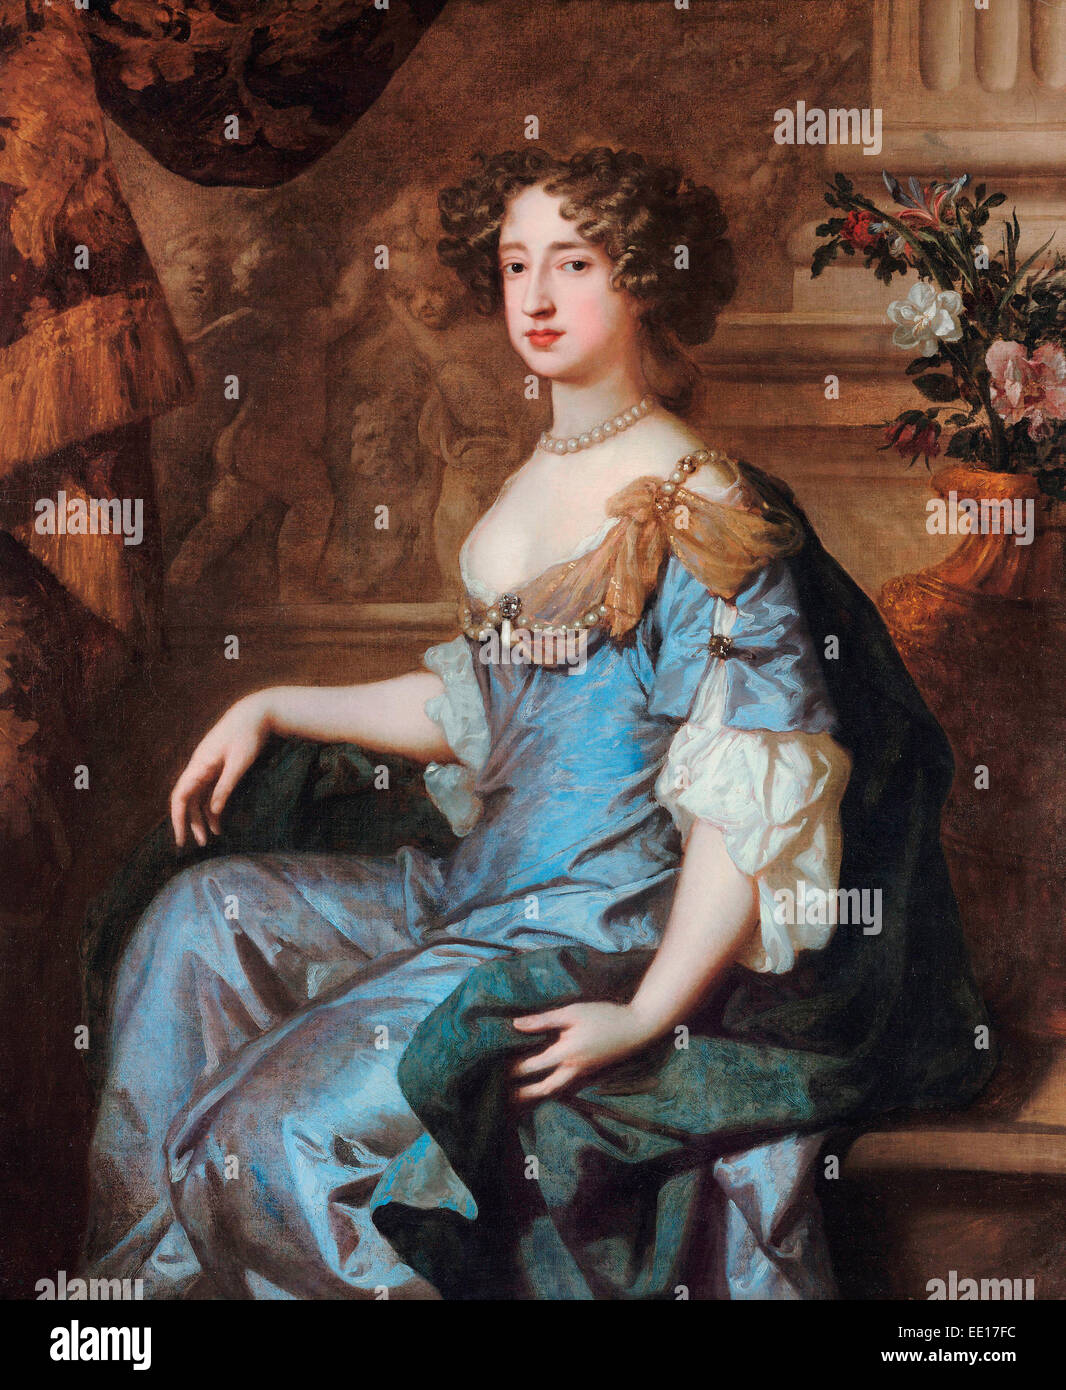 Queen Mary II - Peter Lely vers 1680 Banque D'Images